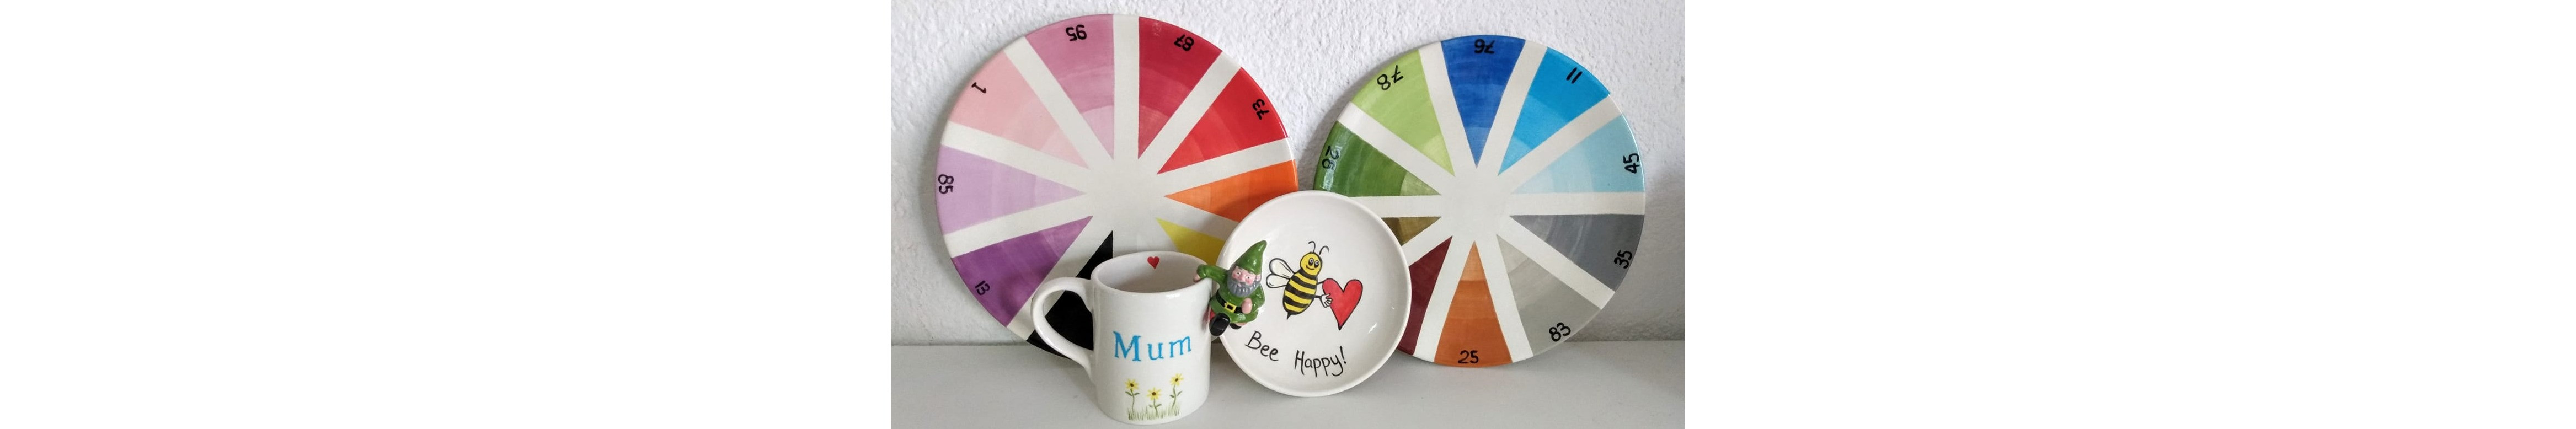 Pottery painting workshops for all ages